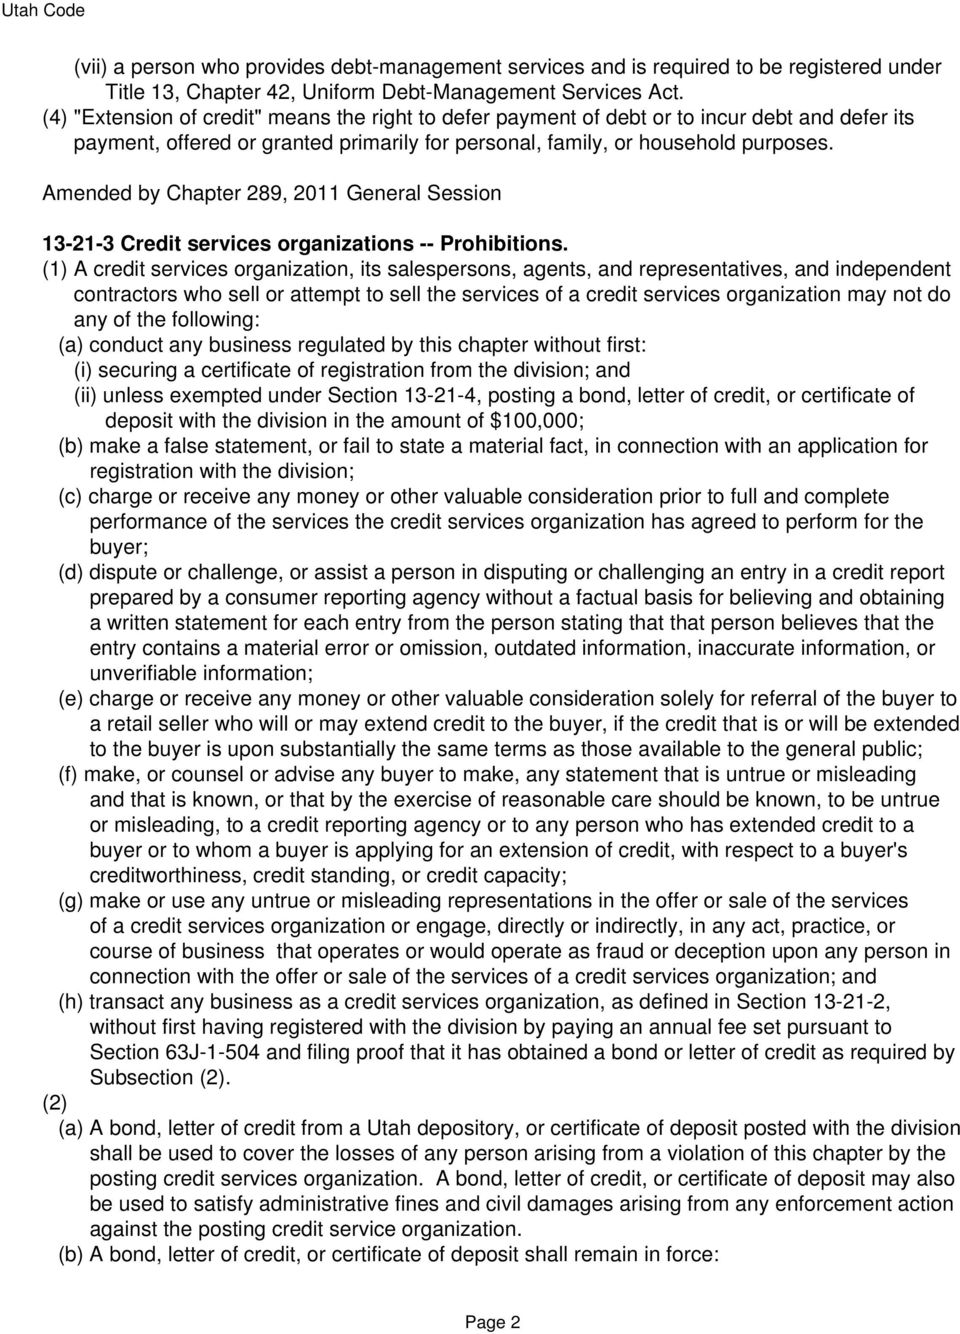 Amended by Chapter 289, 2011 General Session 13-21-3 Credit services organizations -- Prohibitions.